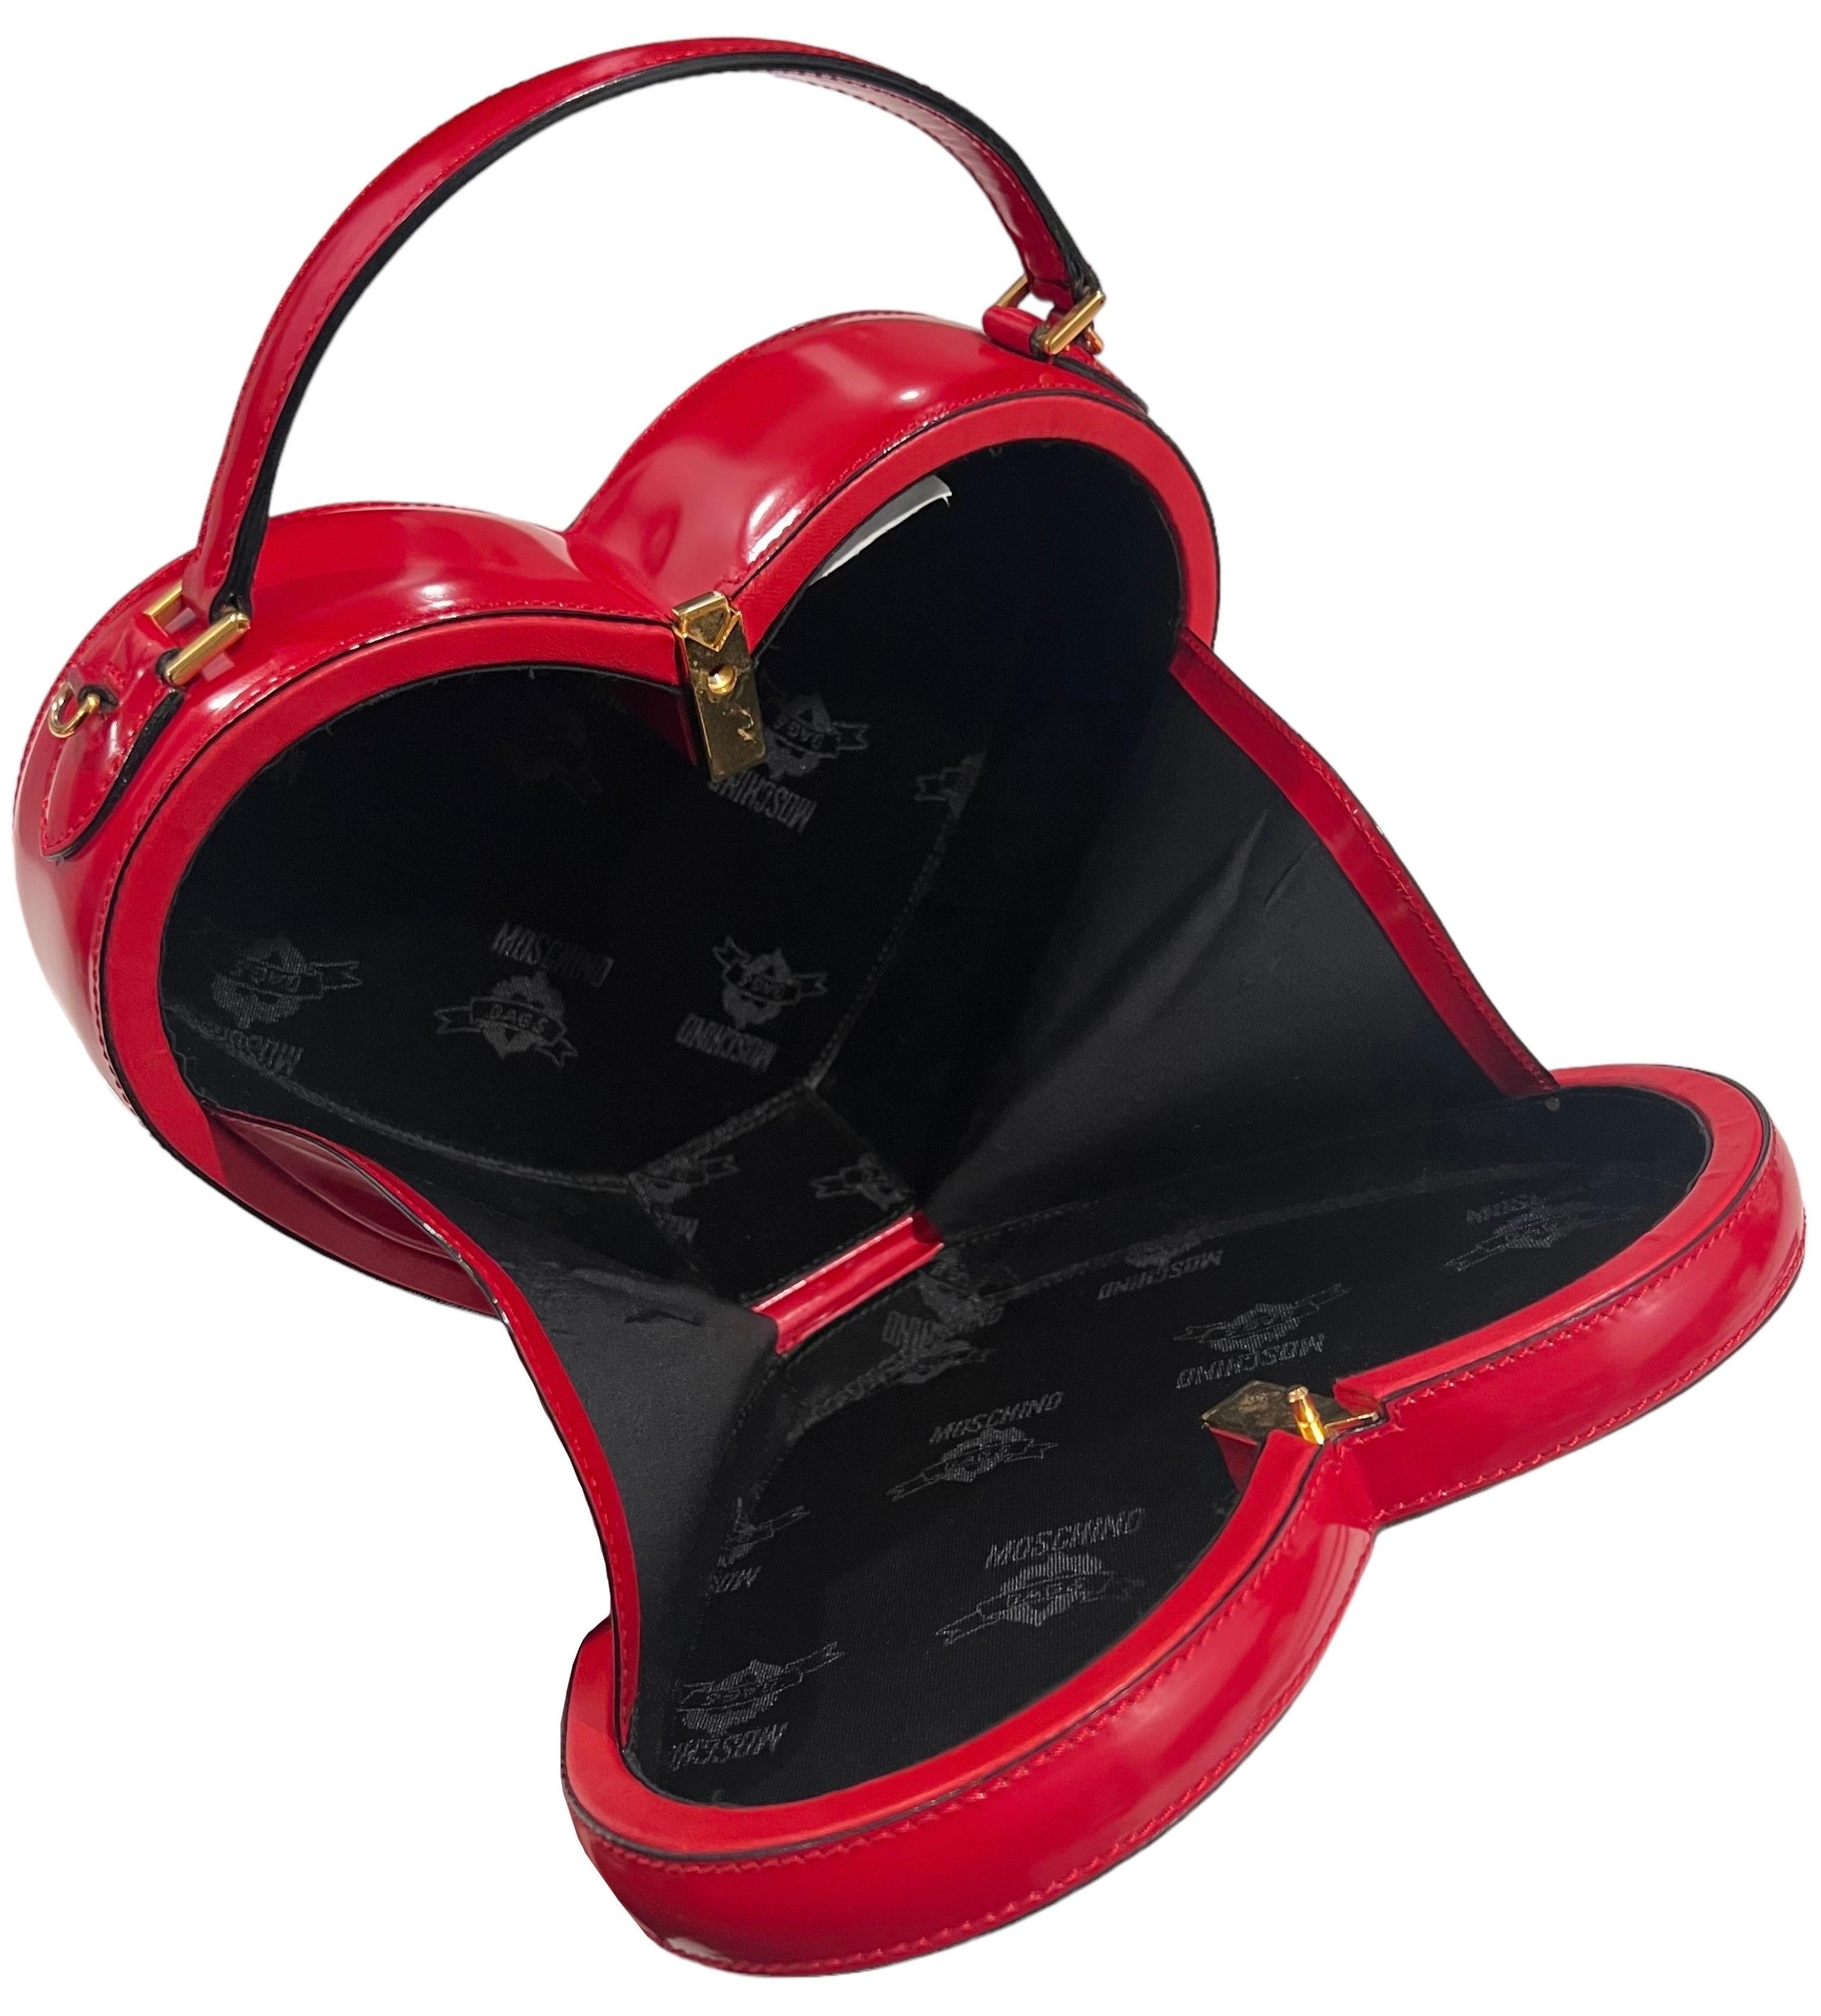 1990's Moschino Red Leather Heart Bag seen on The Nanny 4